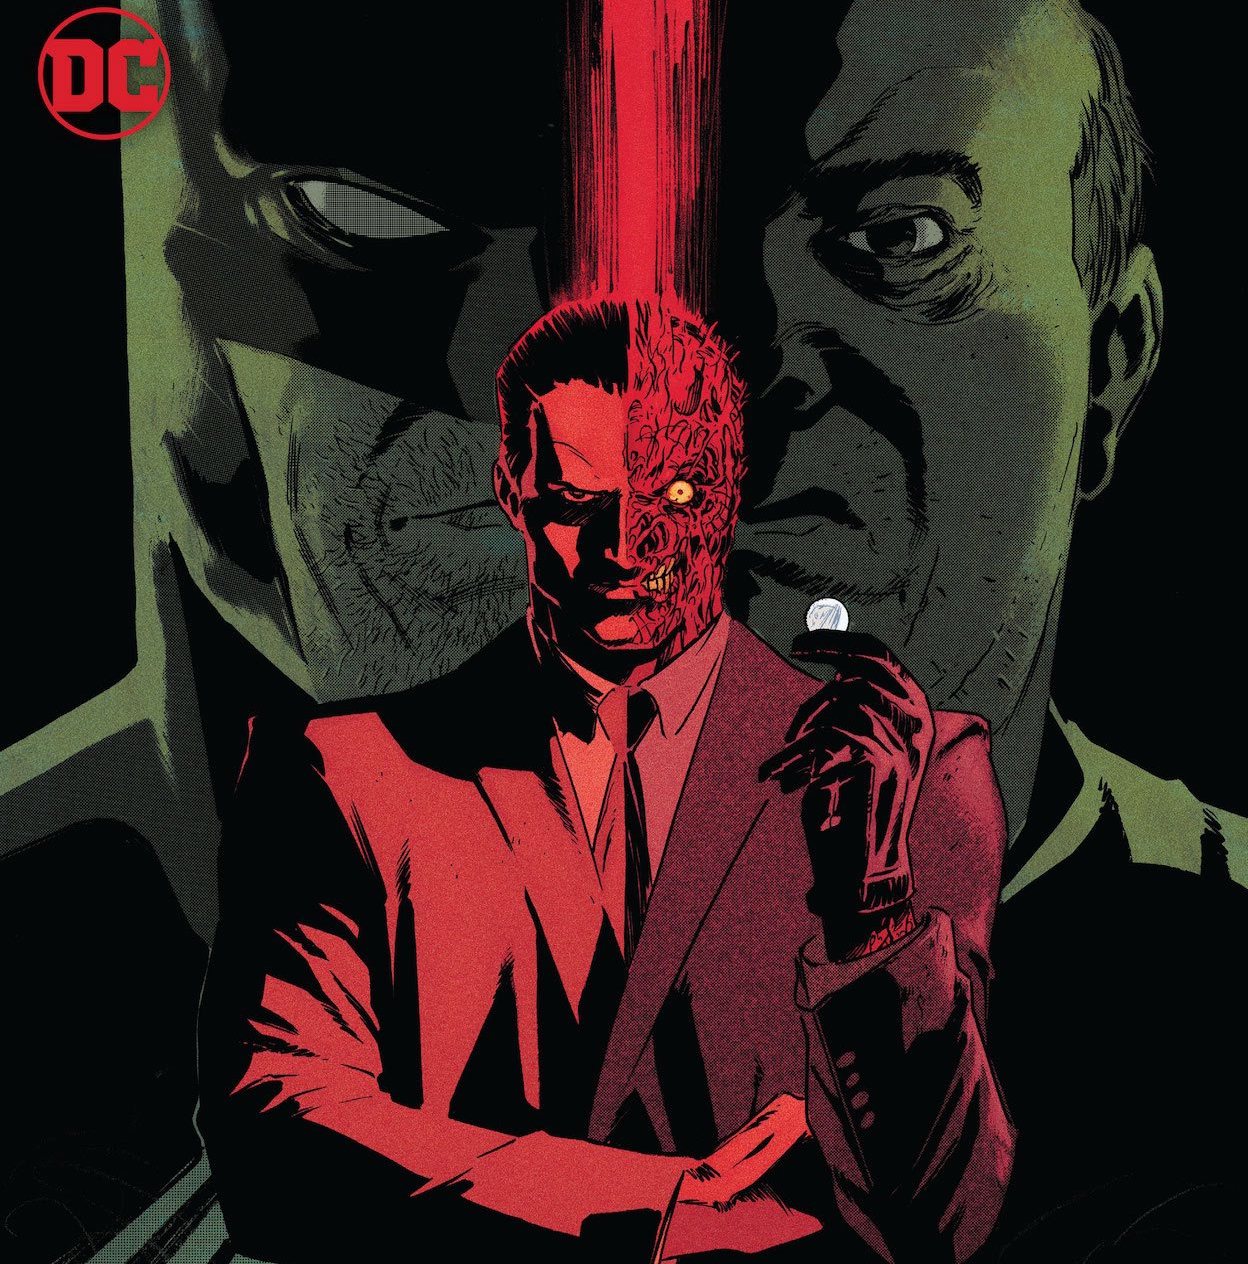 'Batman: One Bad Day – Two-Face' #1 tests a friendship